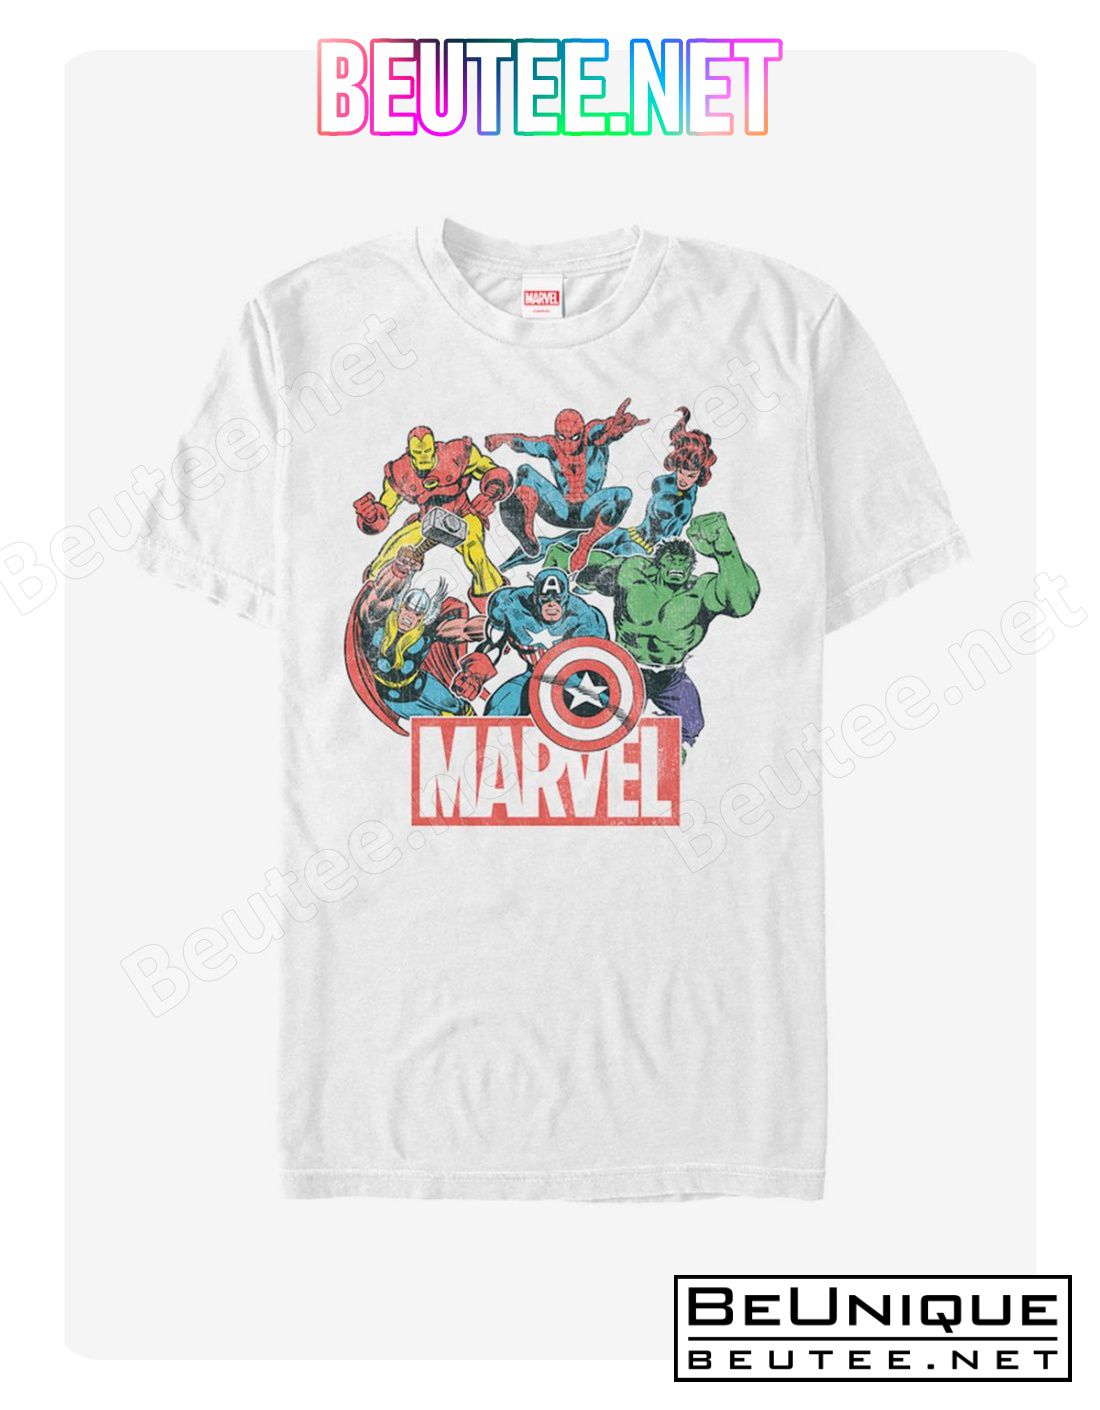 Marvel Heroes of Today T-Shirt